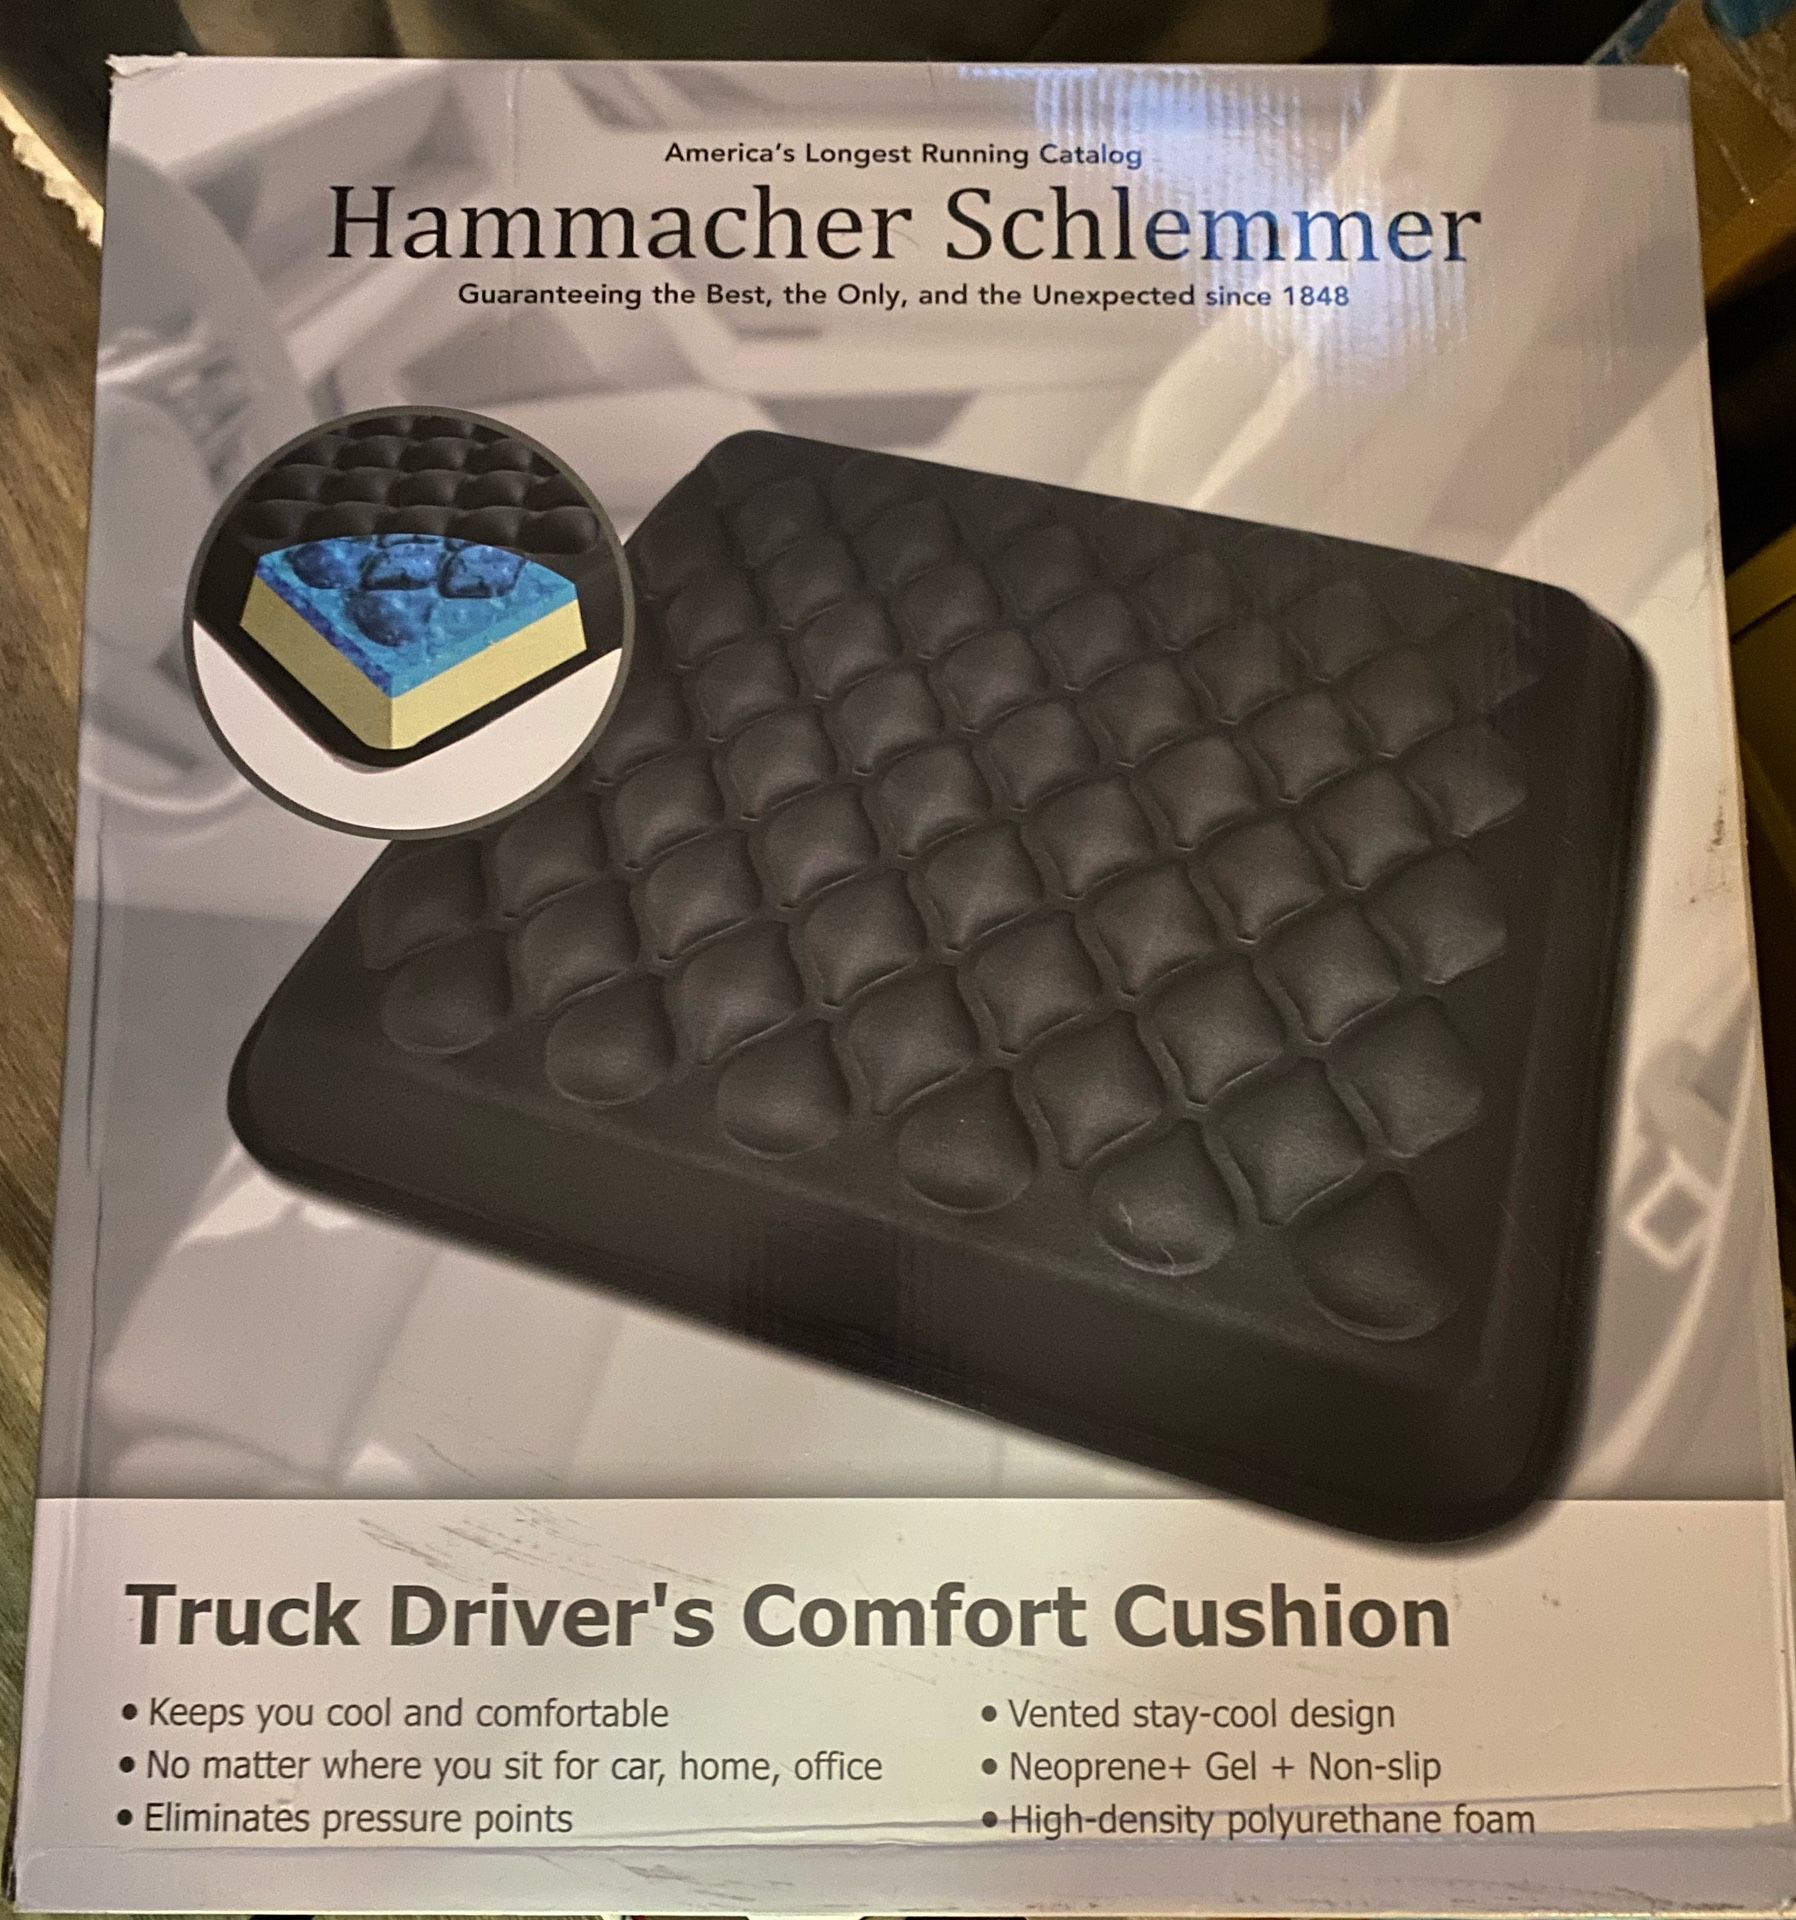 The Truck Driver's Comfort Cushion